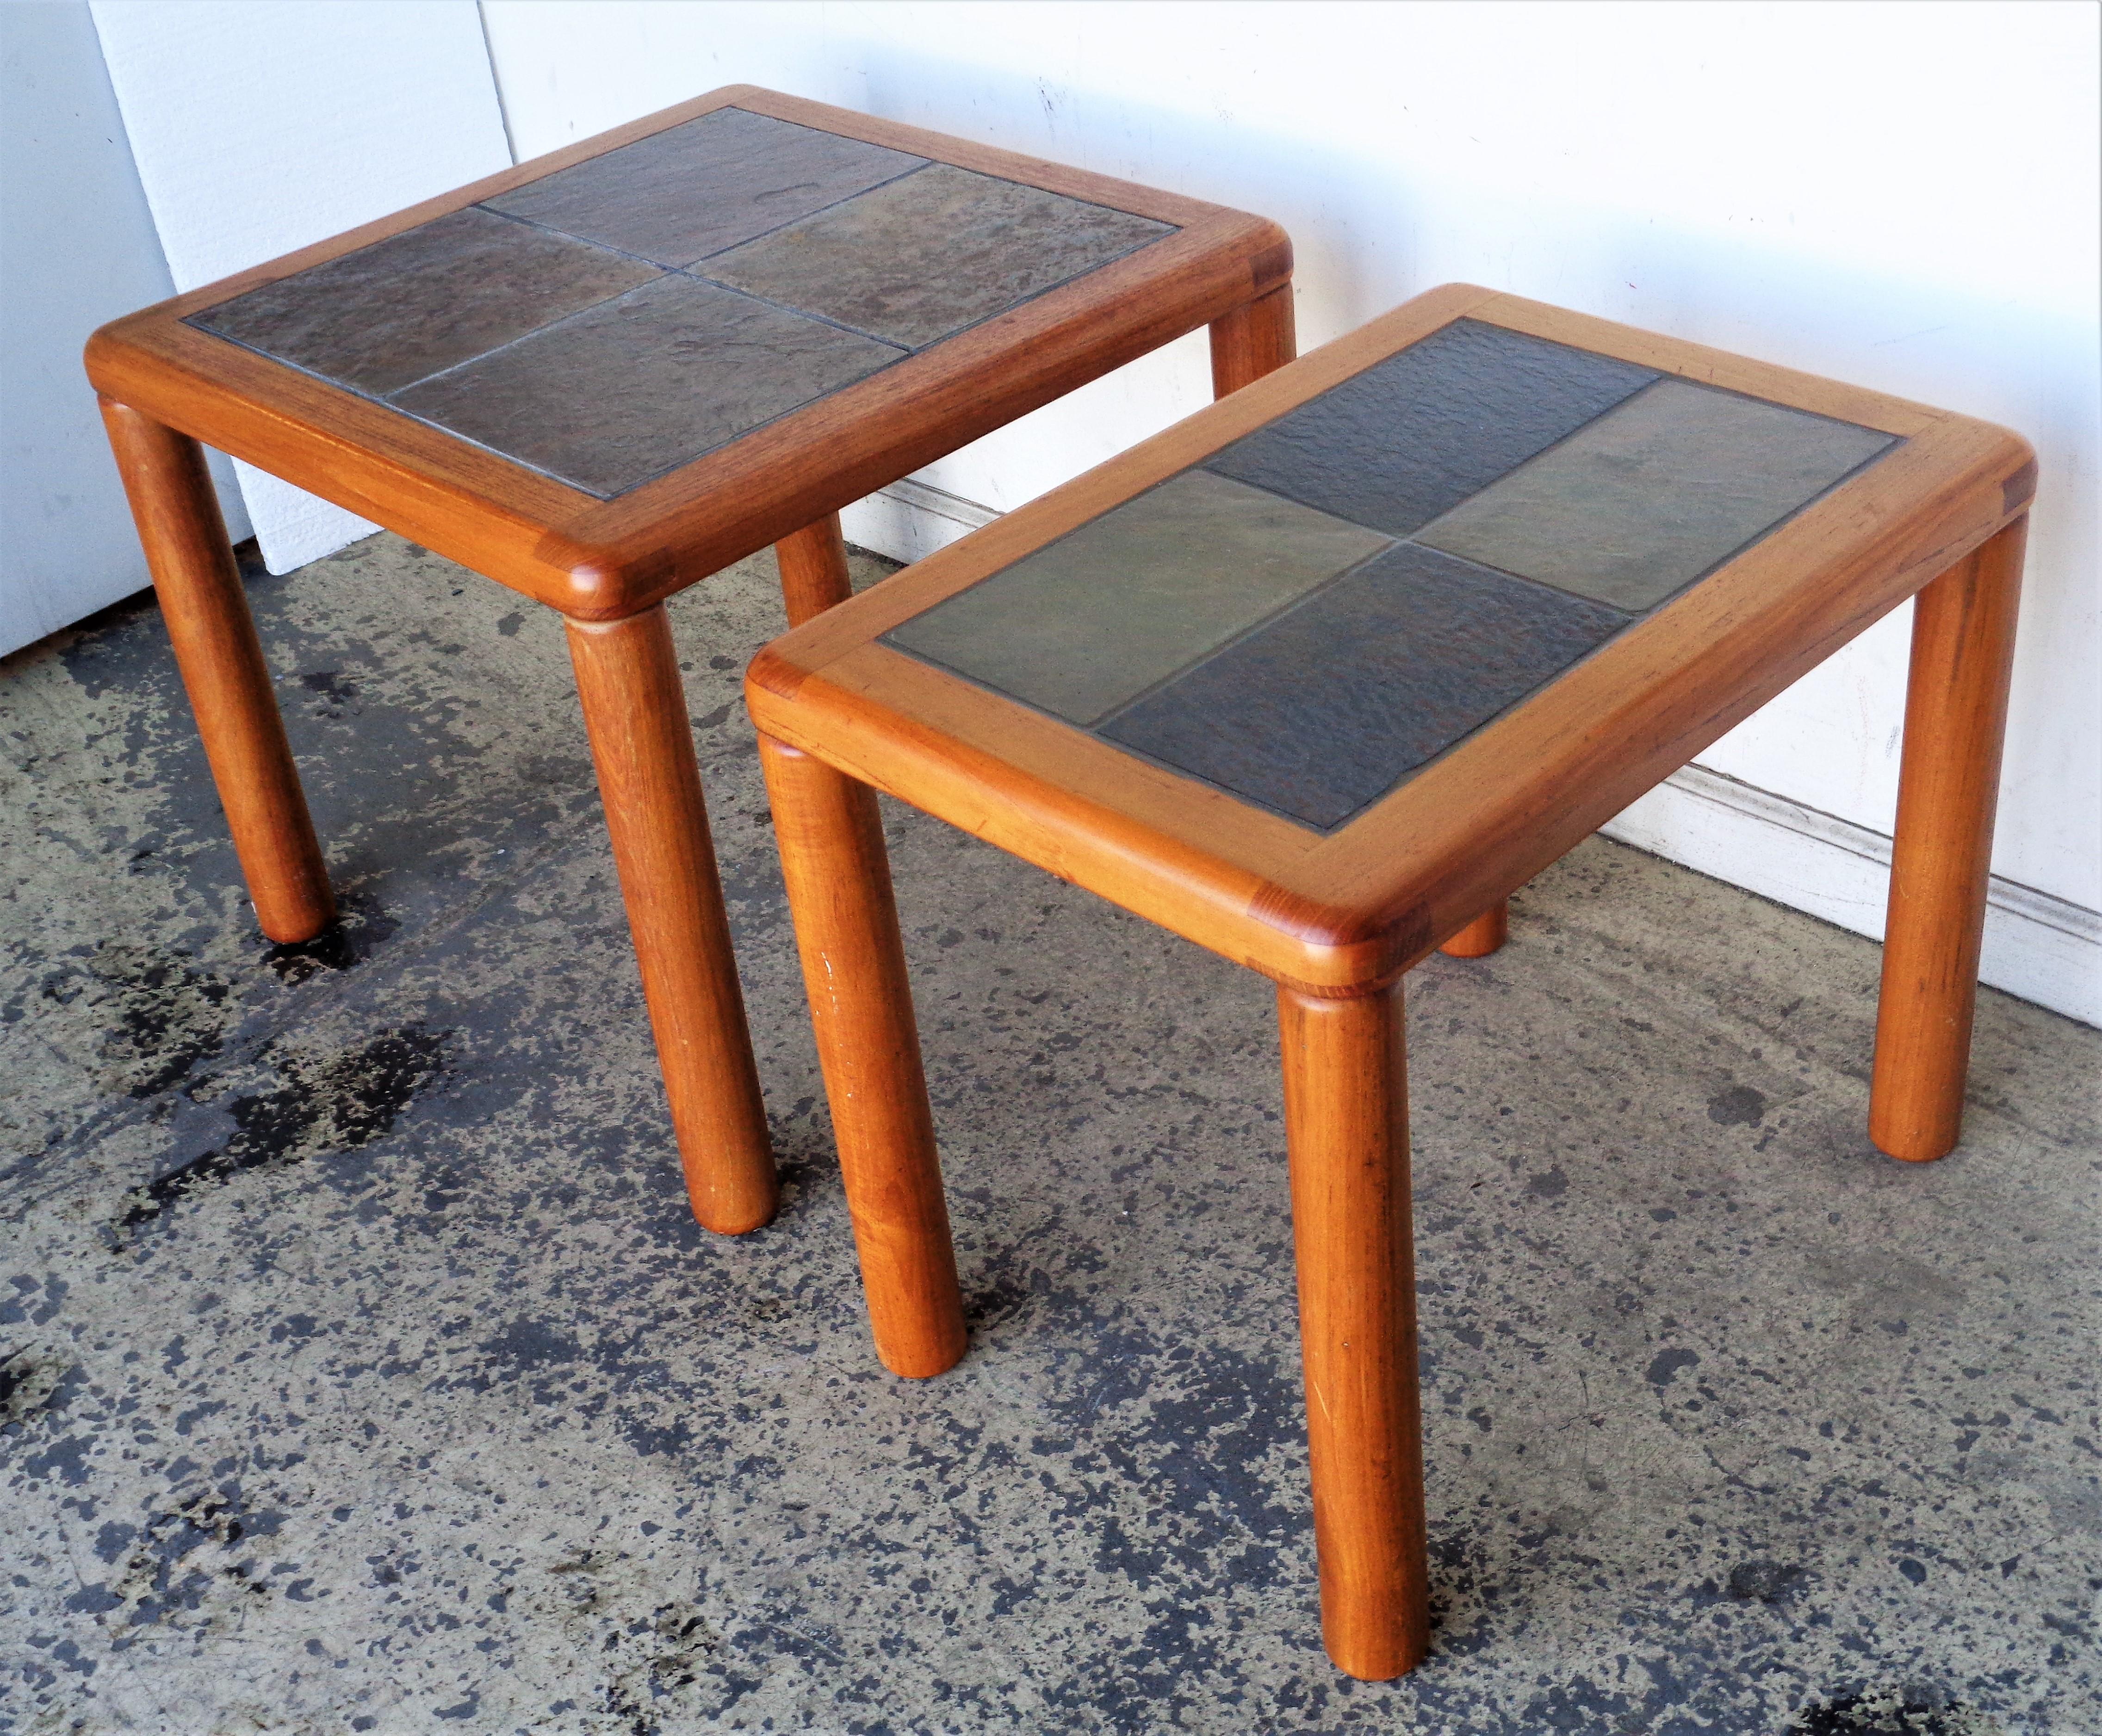 Scandinavian modern teak wood side tables with slate inset tile tops by A/S Haslev Mobelsnedkeri - made in Denmark, attributed to Tue Poulsen. Both are label signed on underside. Circa 1960's. Rectangular table measures 19 1/2 inches high by 24